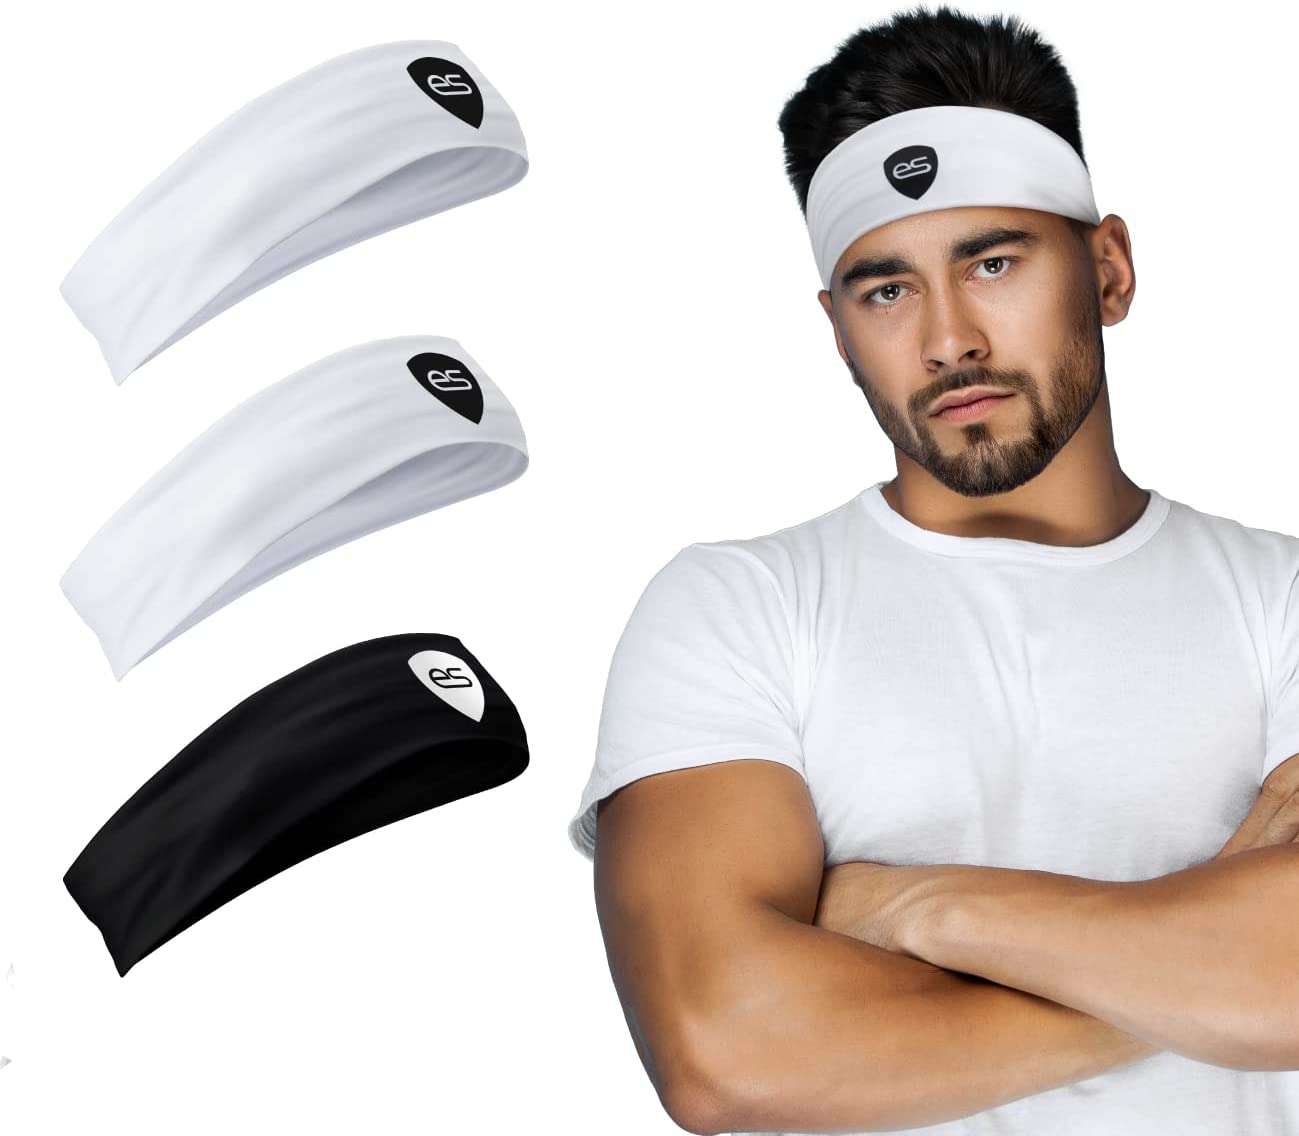 The Ultimate Workout and Sports Headband